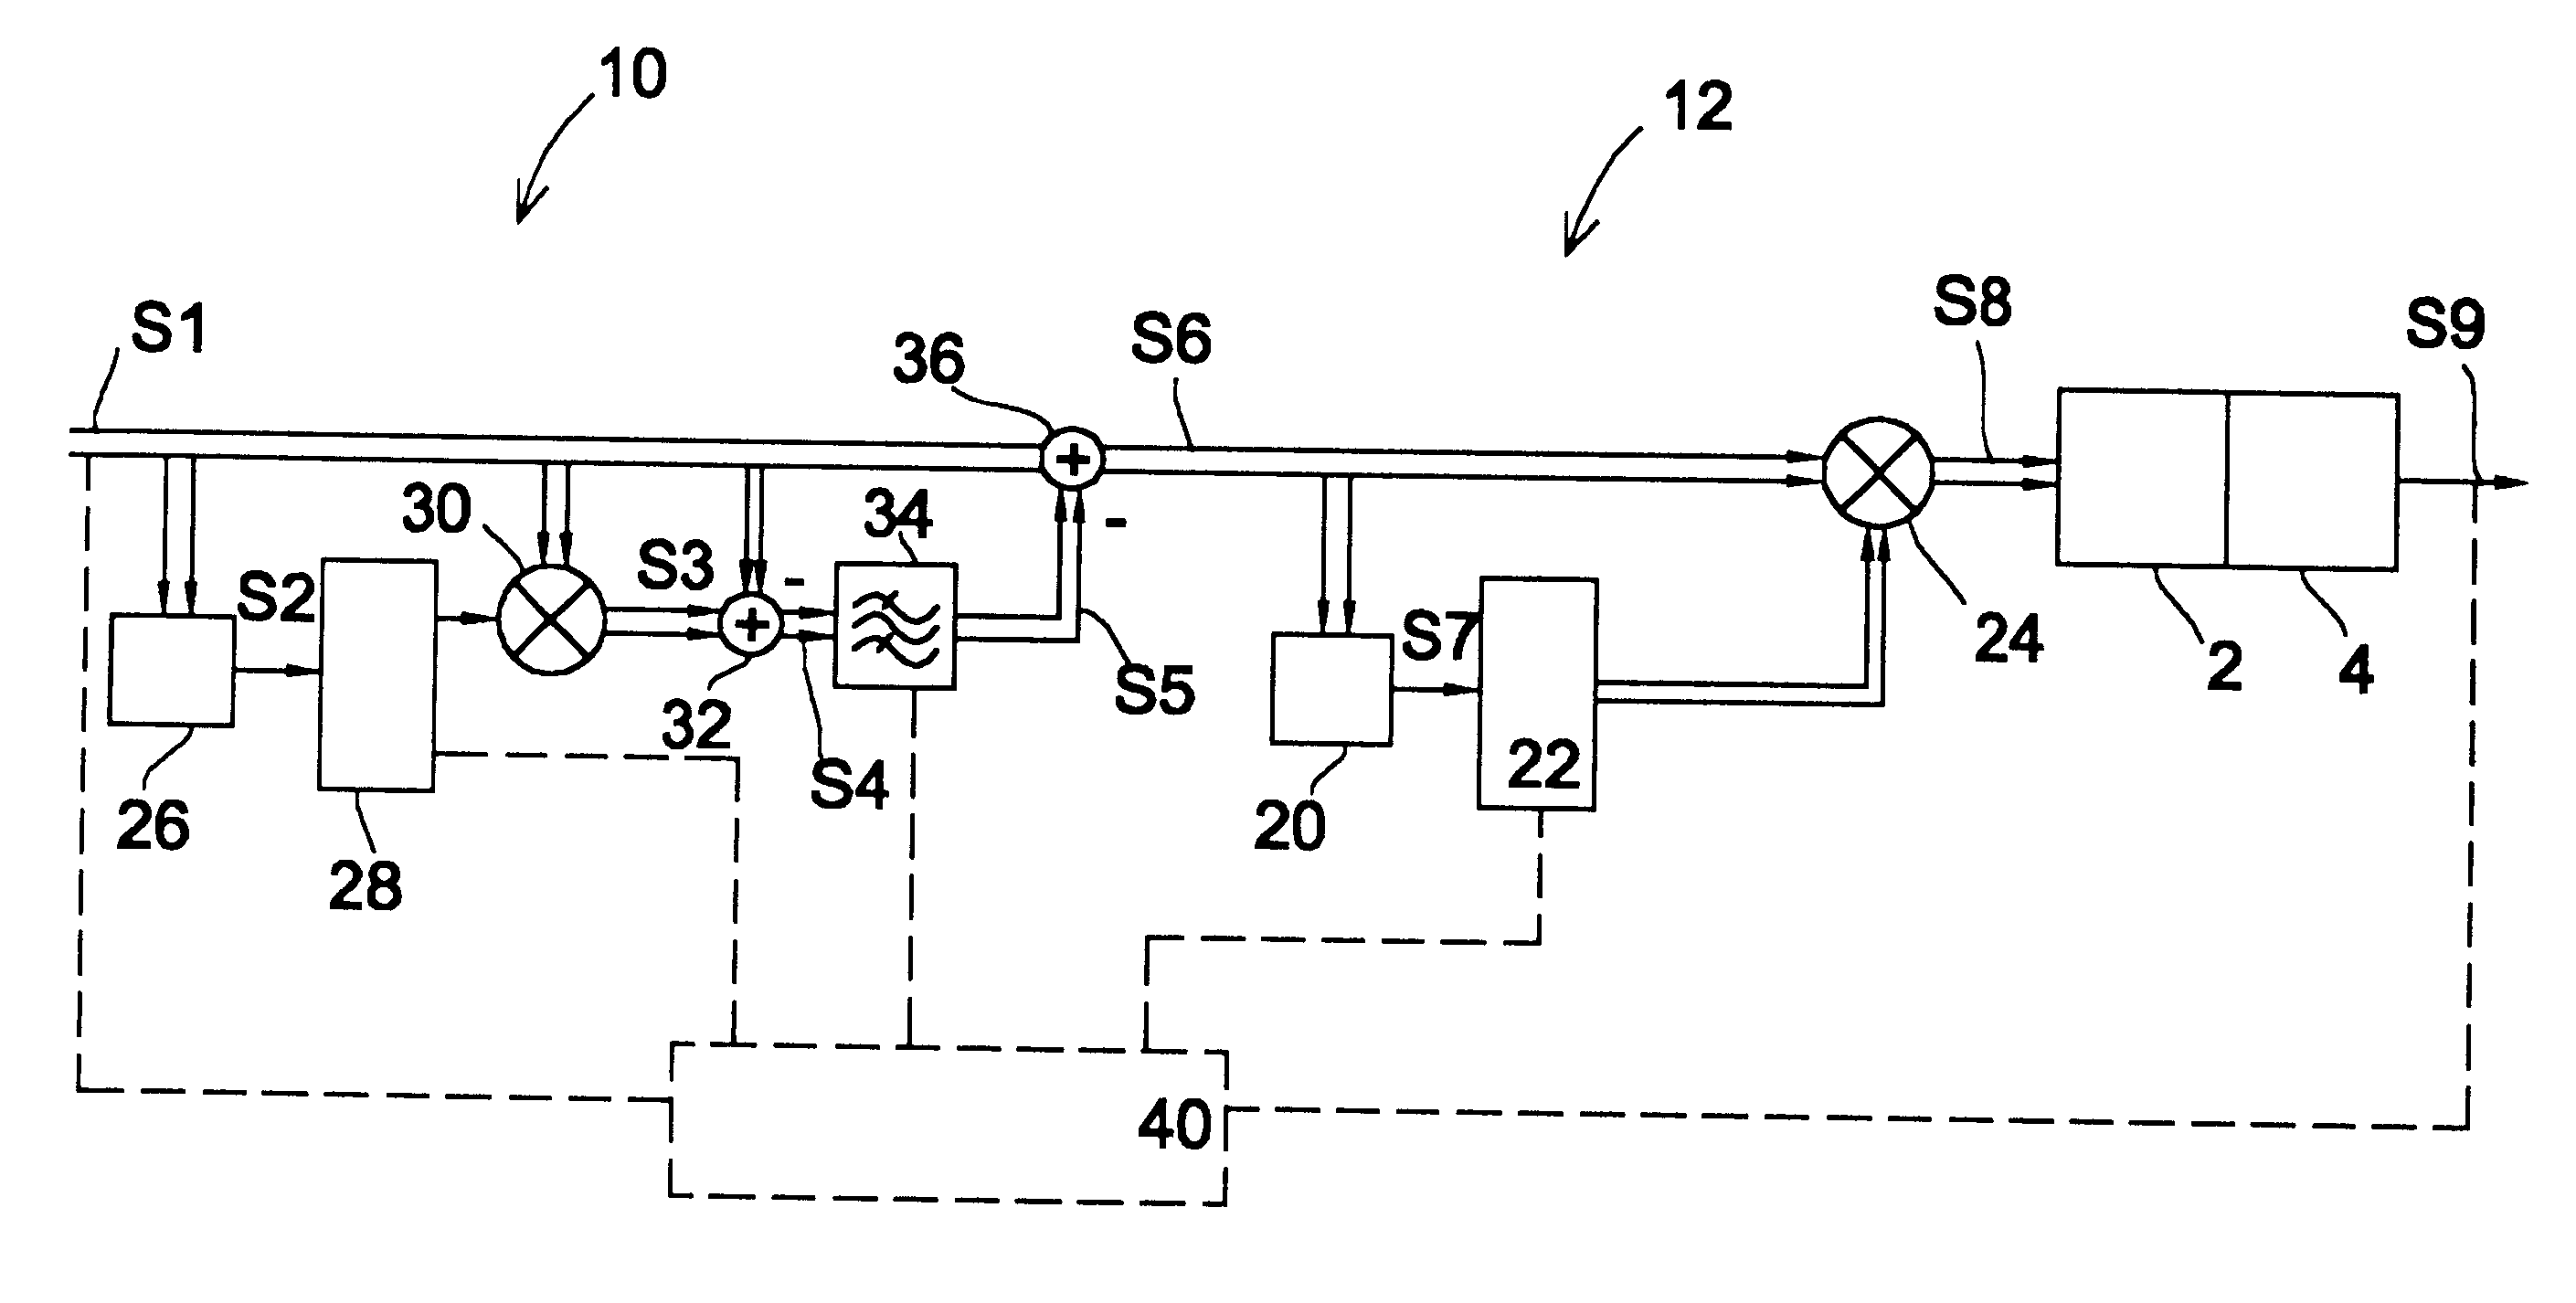 System for reducing adjacent-channel interference by pre-linearization and pre-distortion